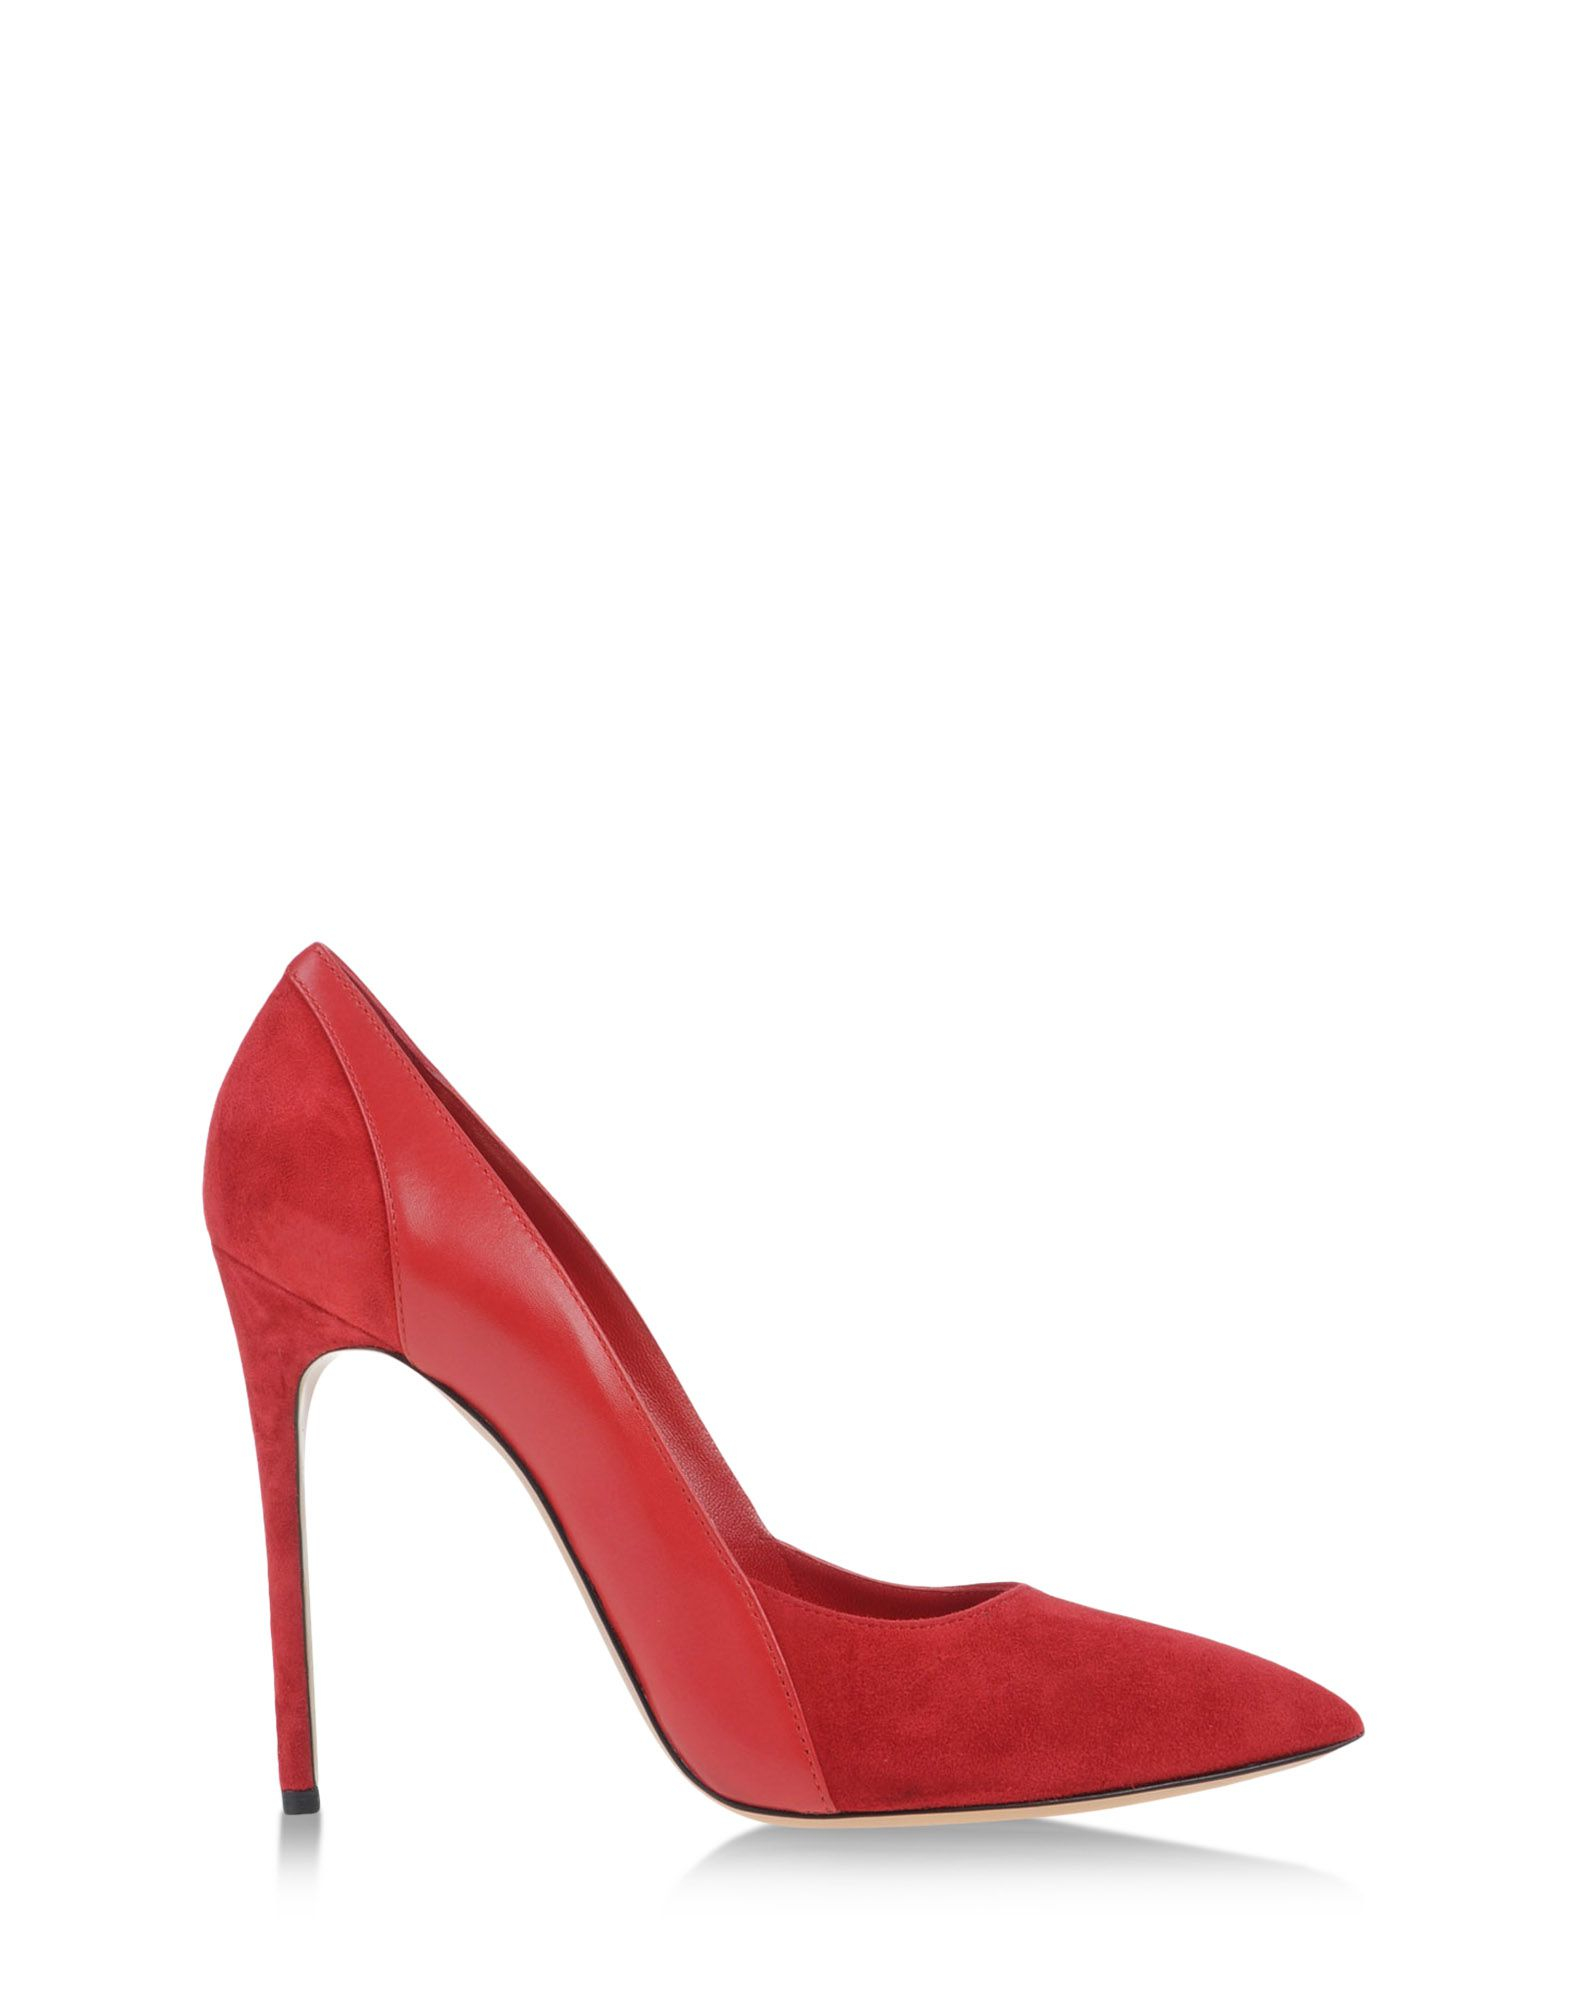 Casadei Closed-Toe Slip-Ons in Red | Lyst